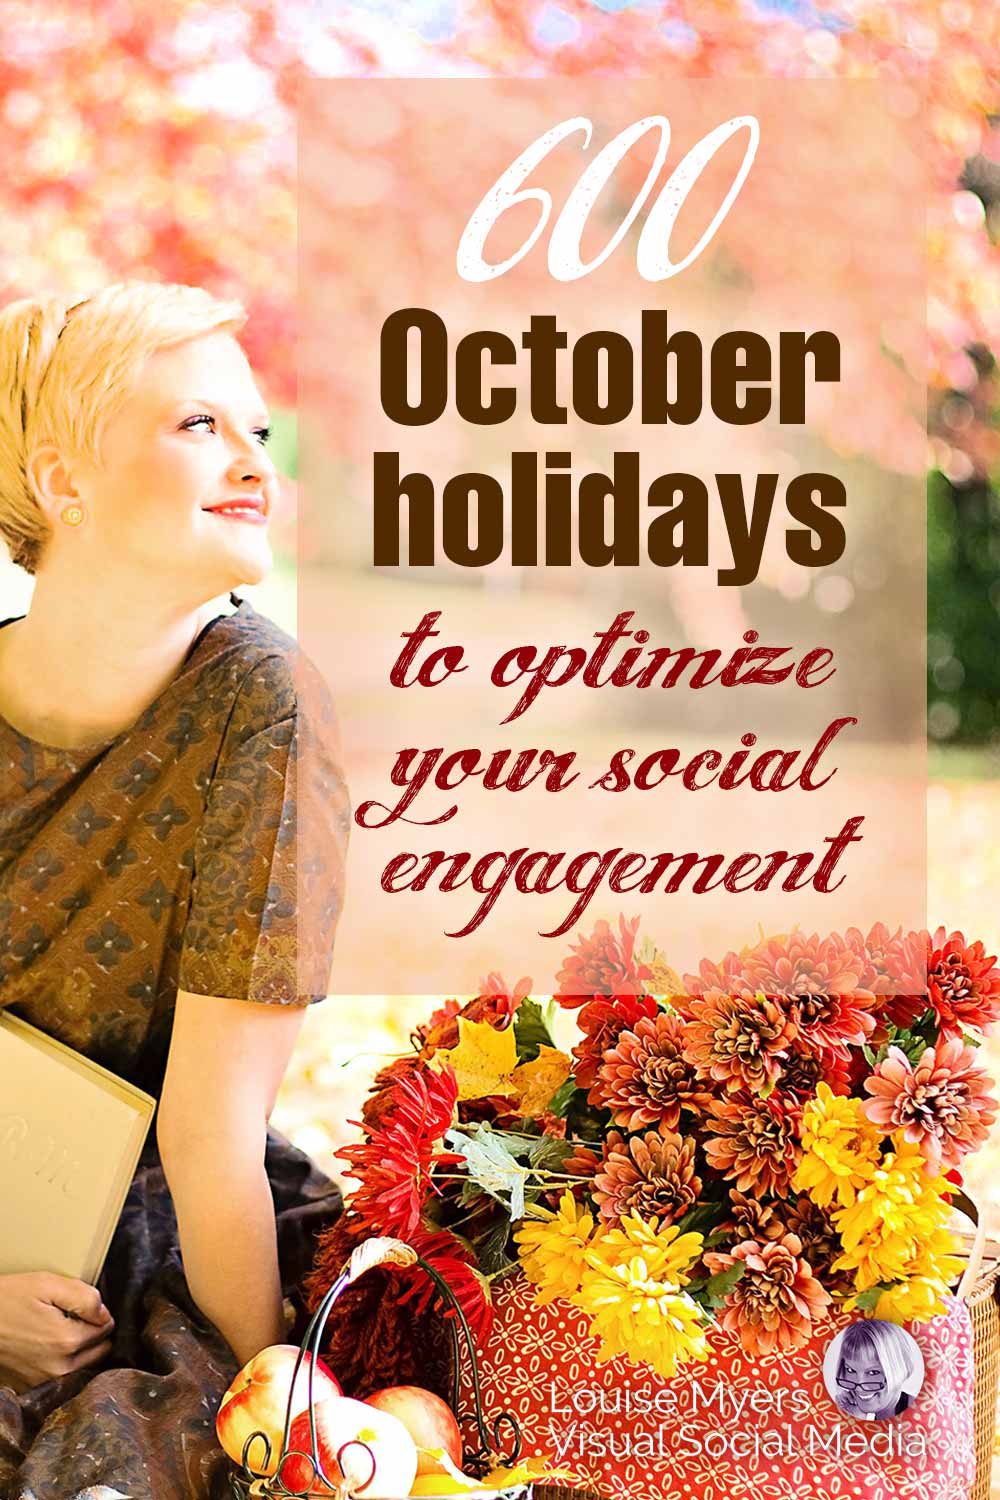 woman in brown dress sits in park with autumn leaves and basket of chrysanthemums with text, 600 october holidays to optimize your social engagement.